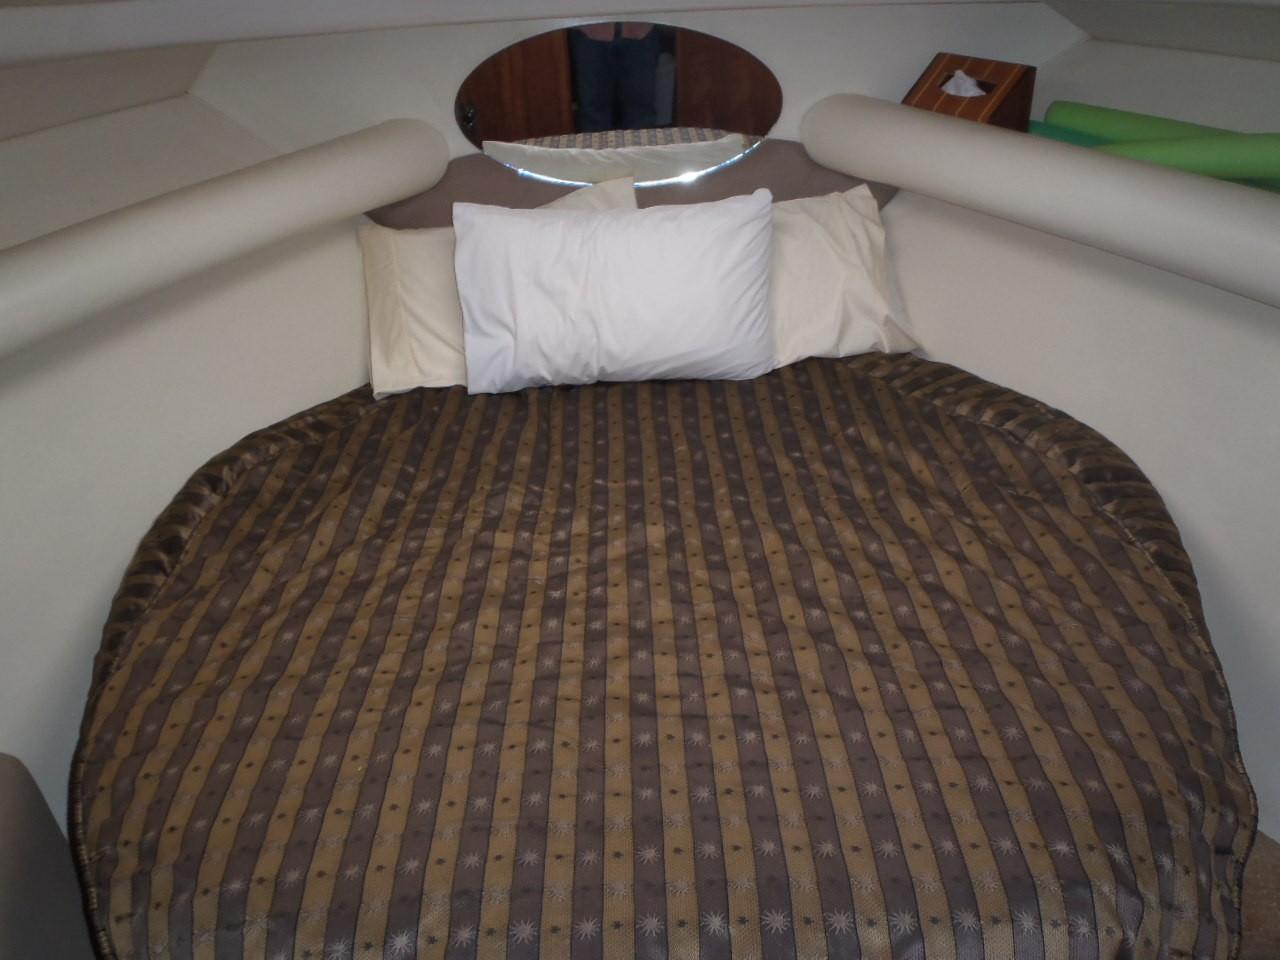 Island bed in master